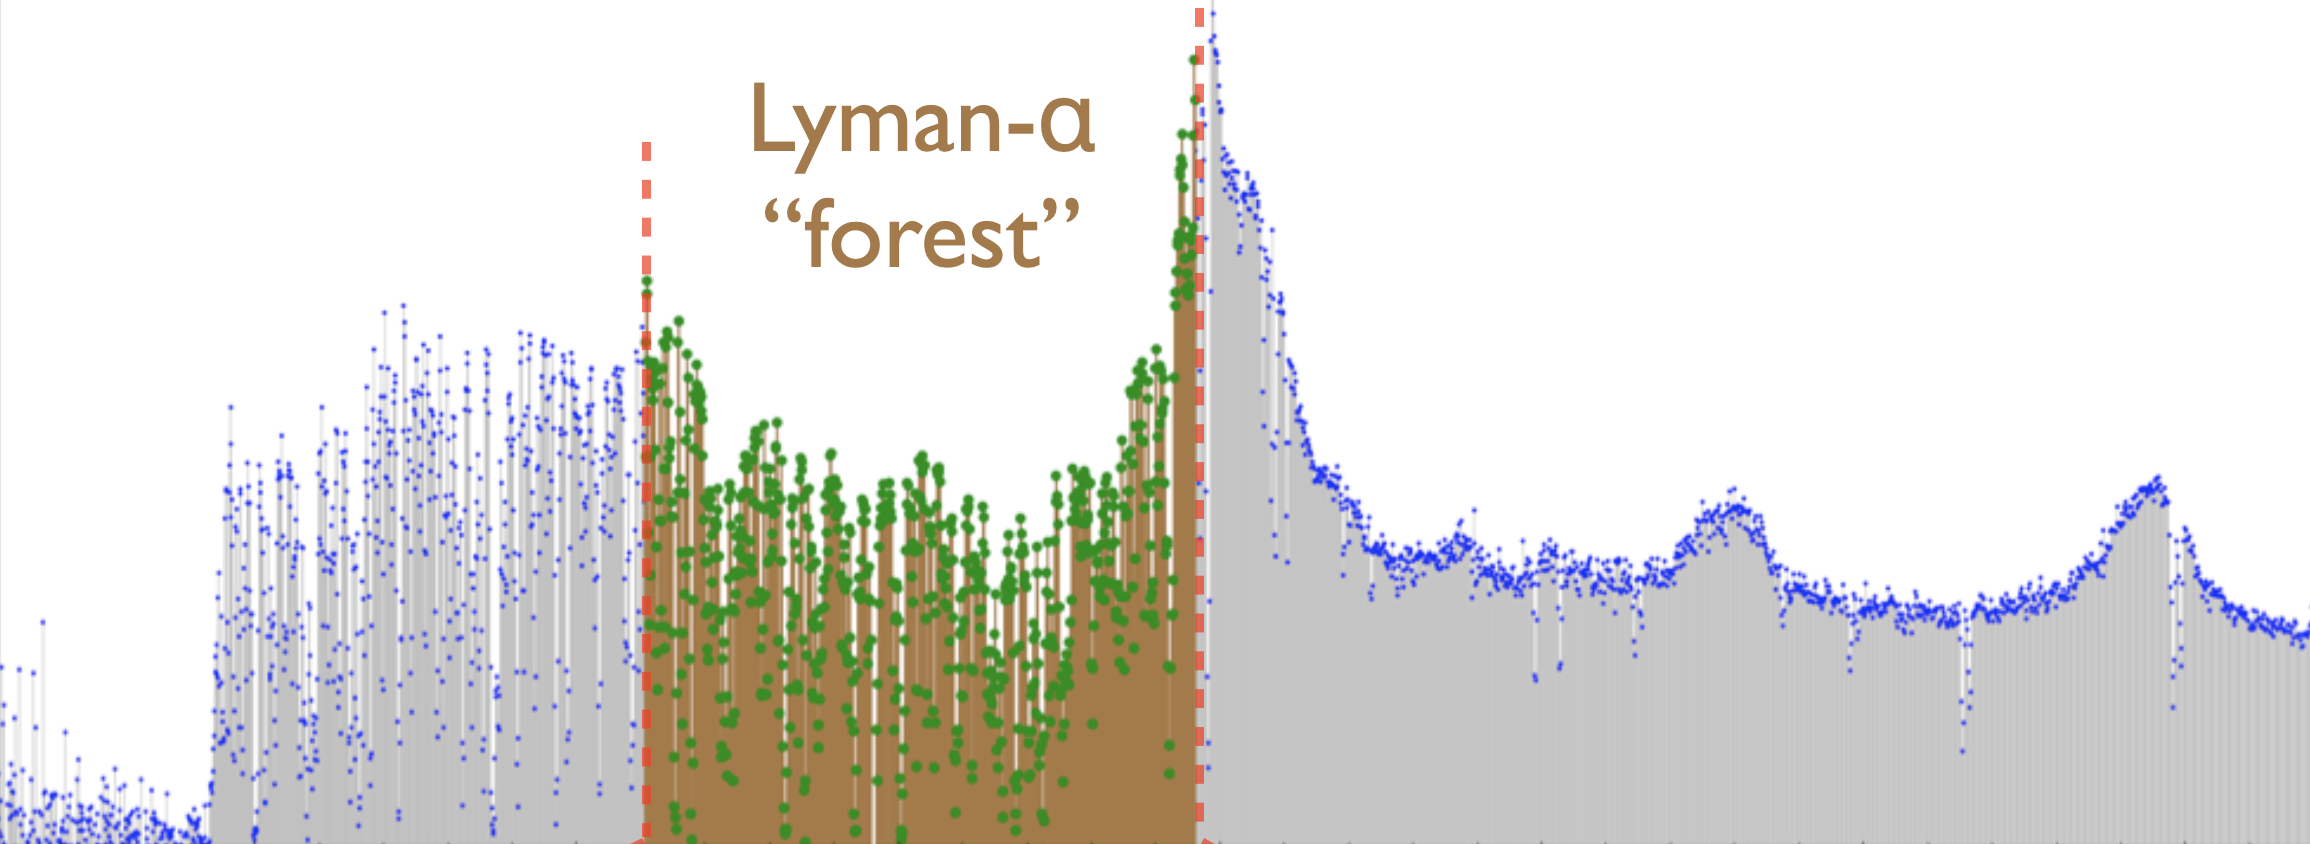 Absorption lines of the “Lyman-alpha forest”